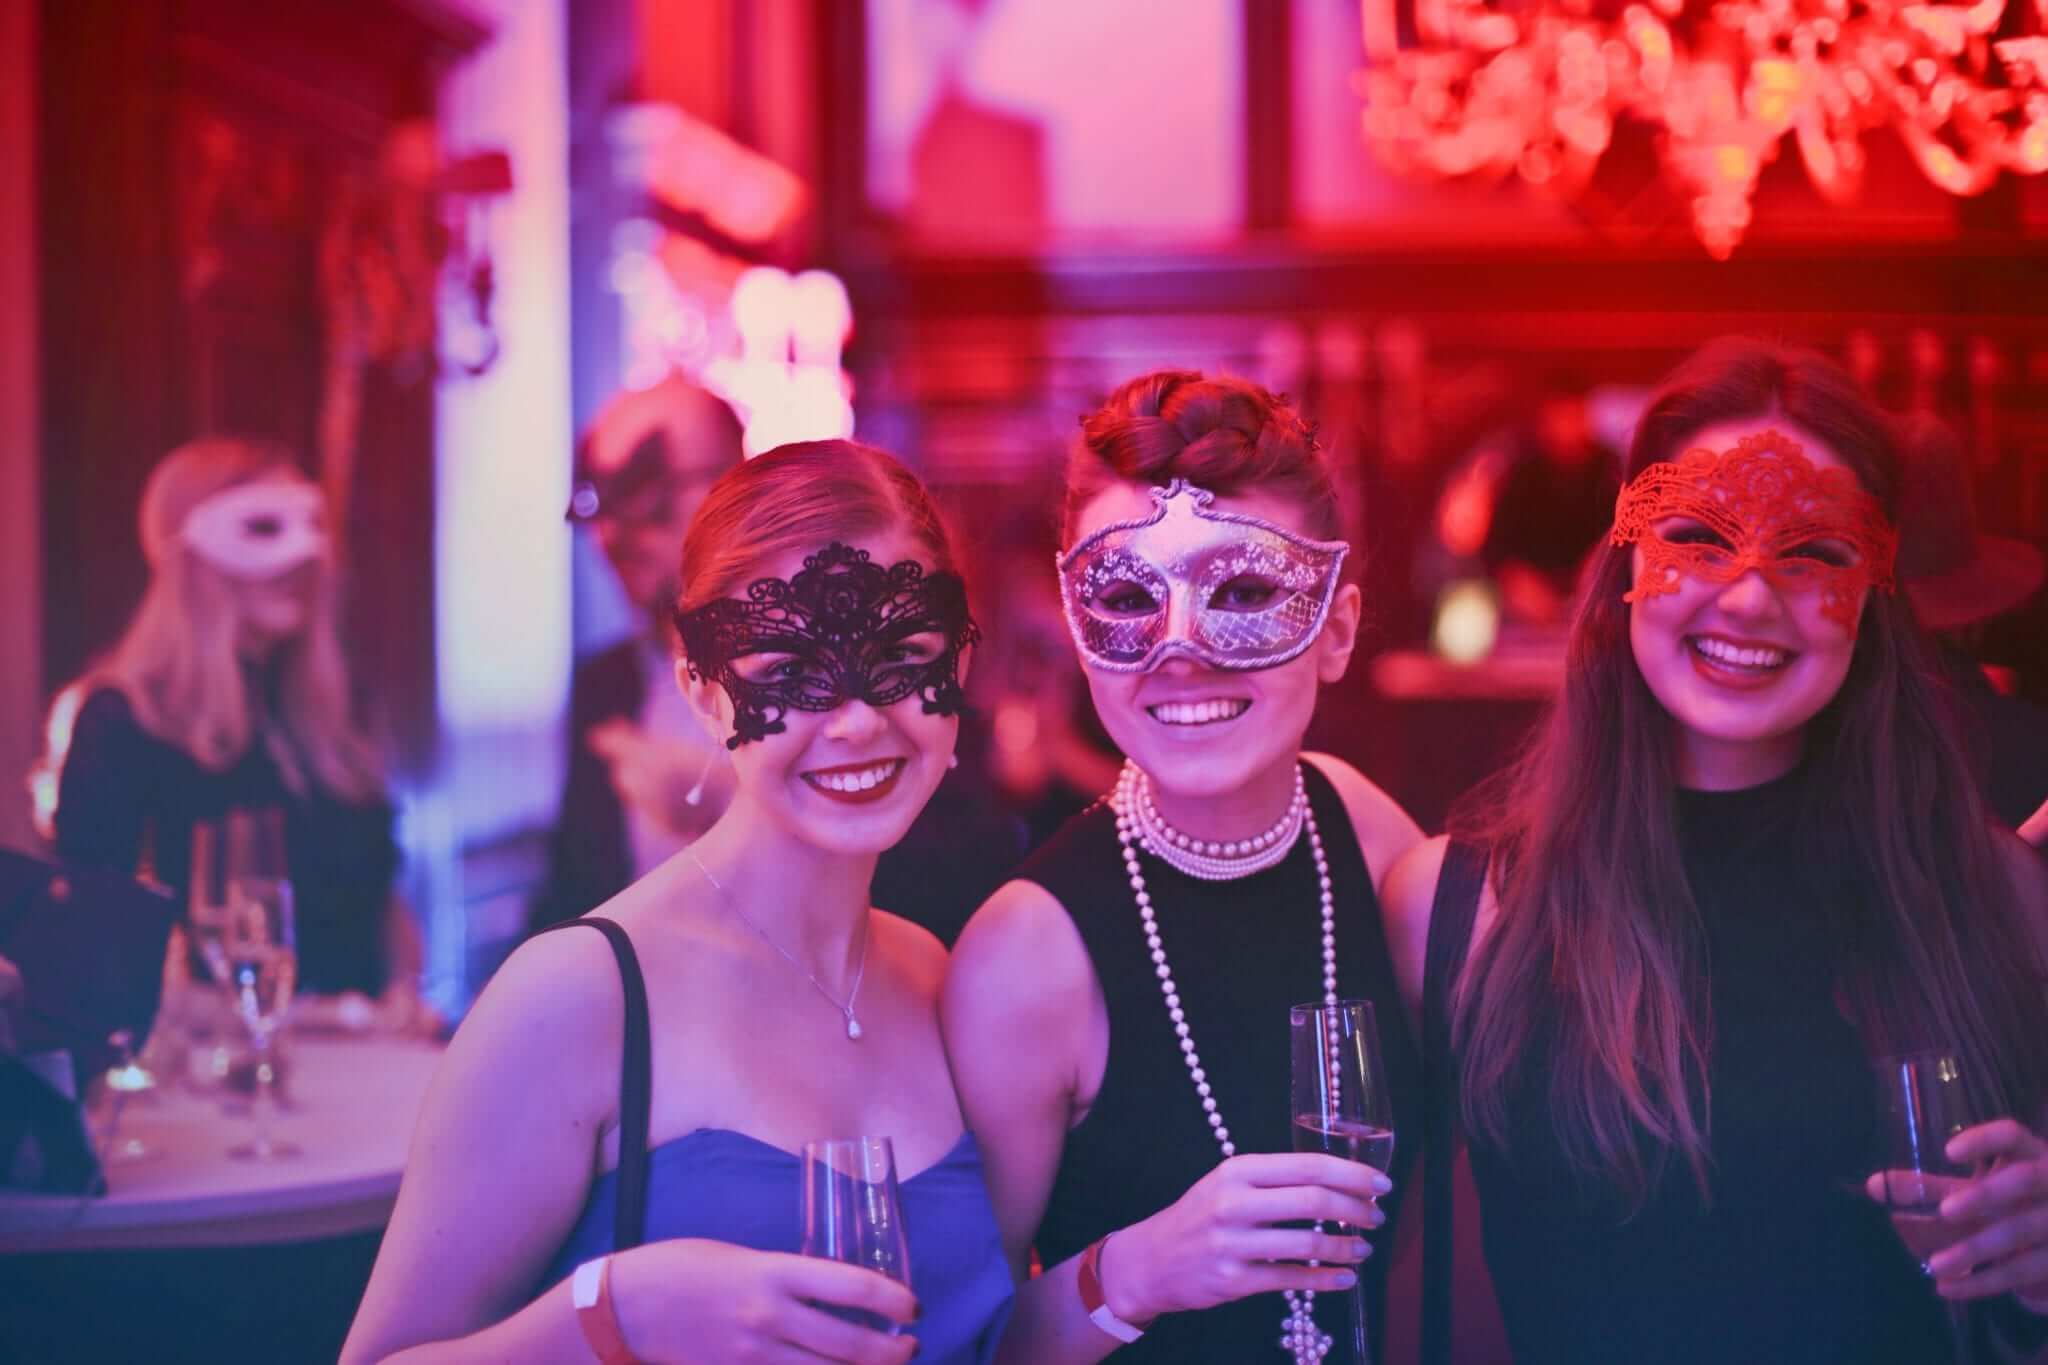 Three women wearing masquerade masks and holding champagne glasses at a festive party with colorful lighting.